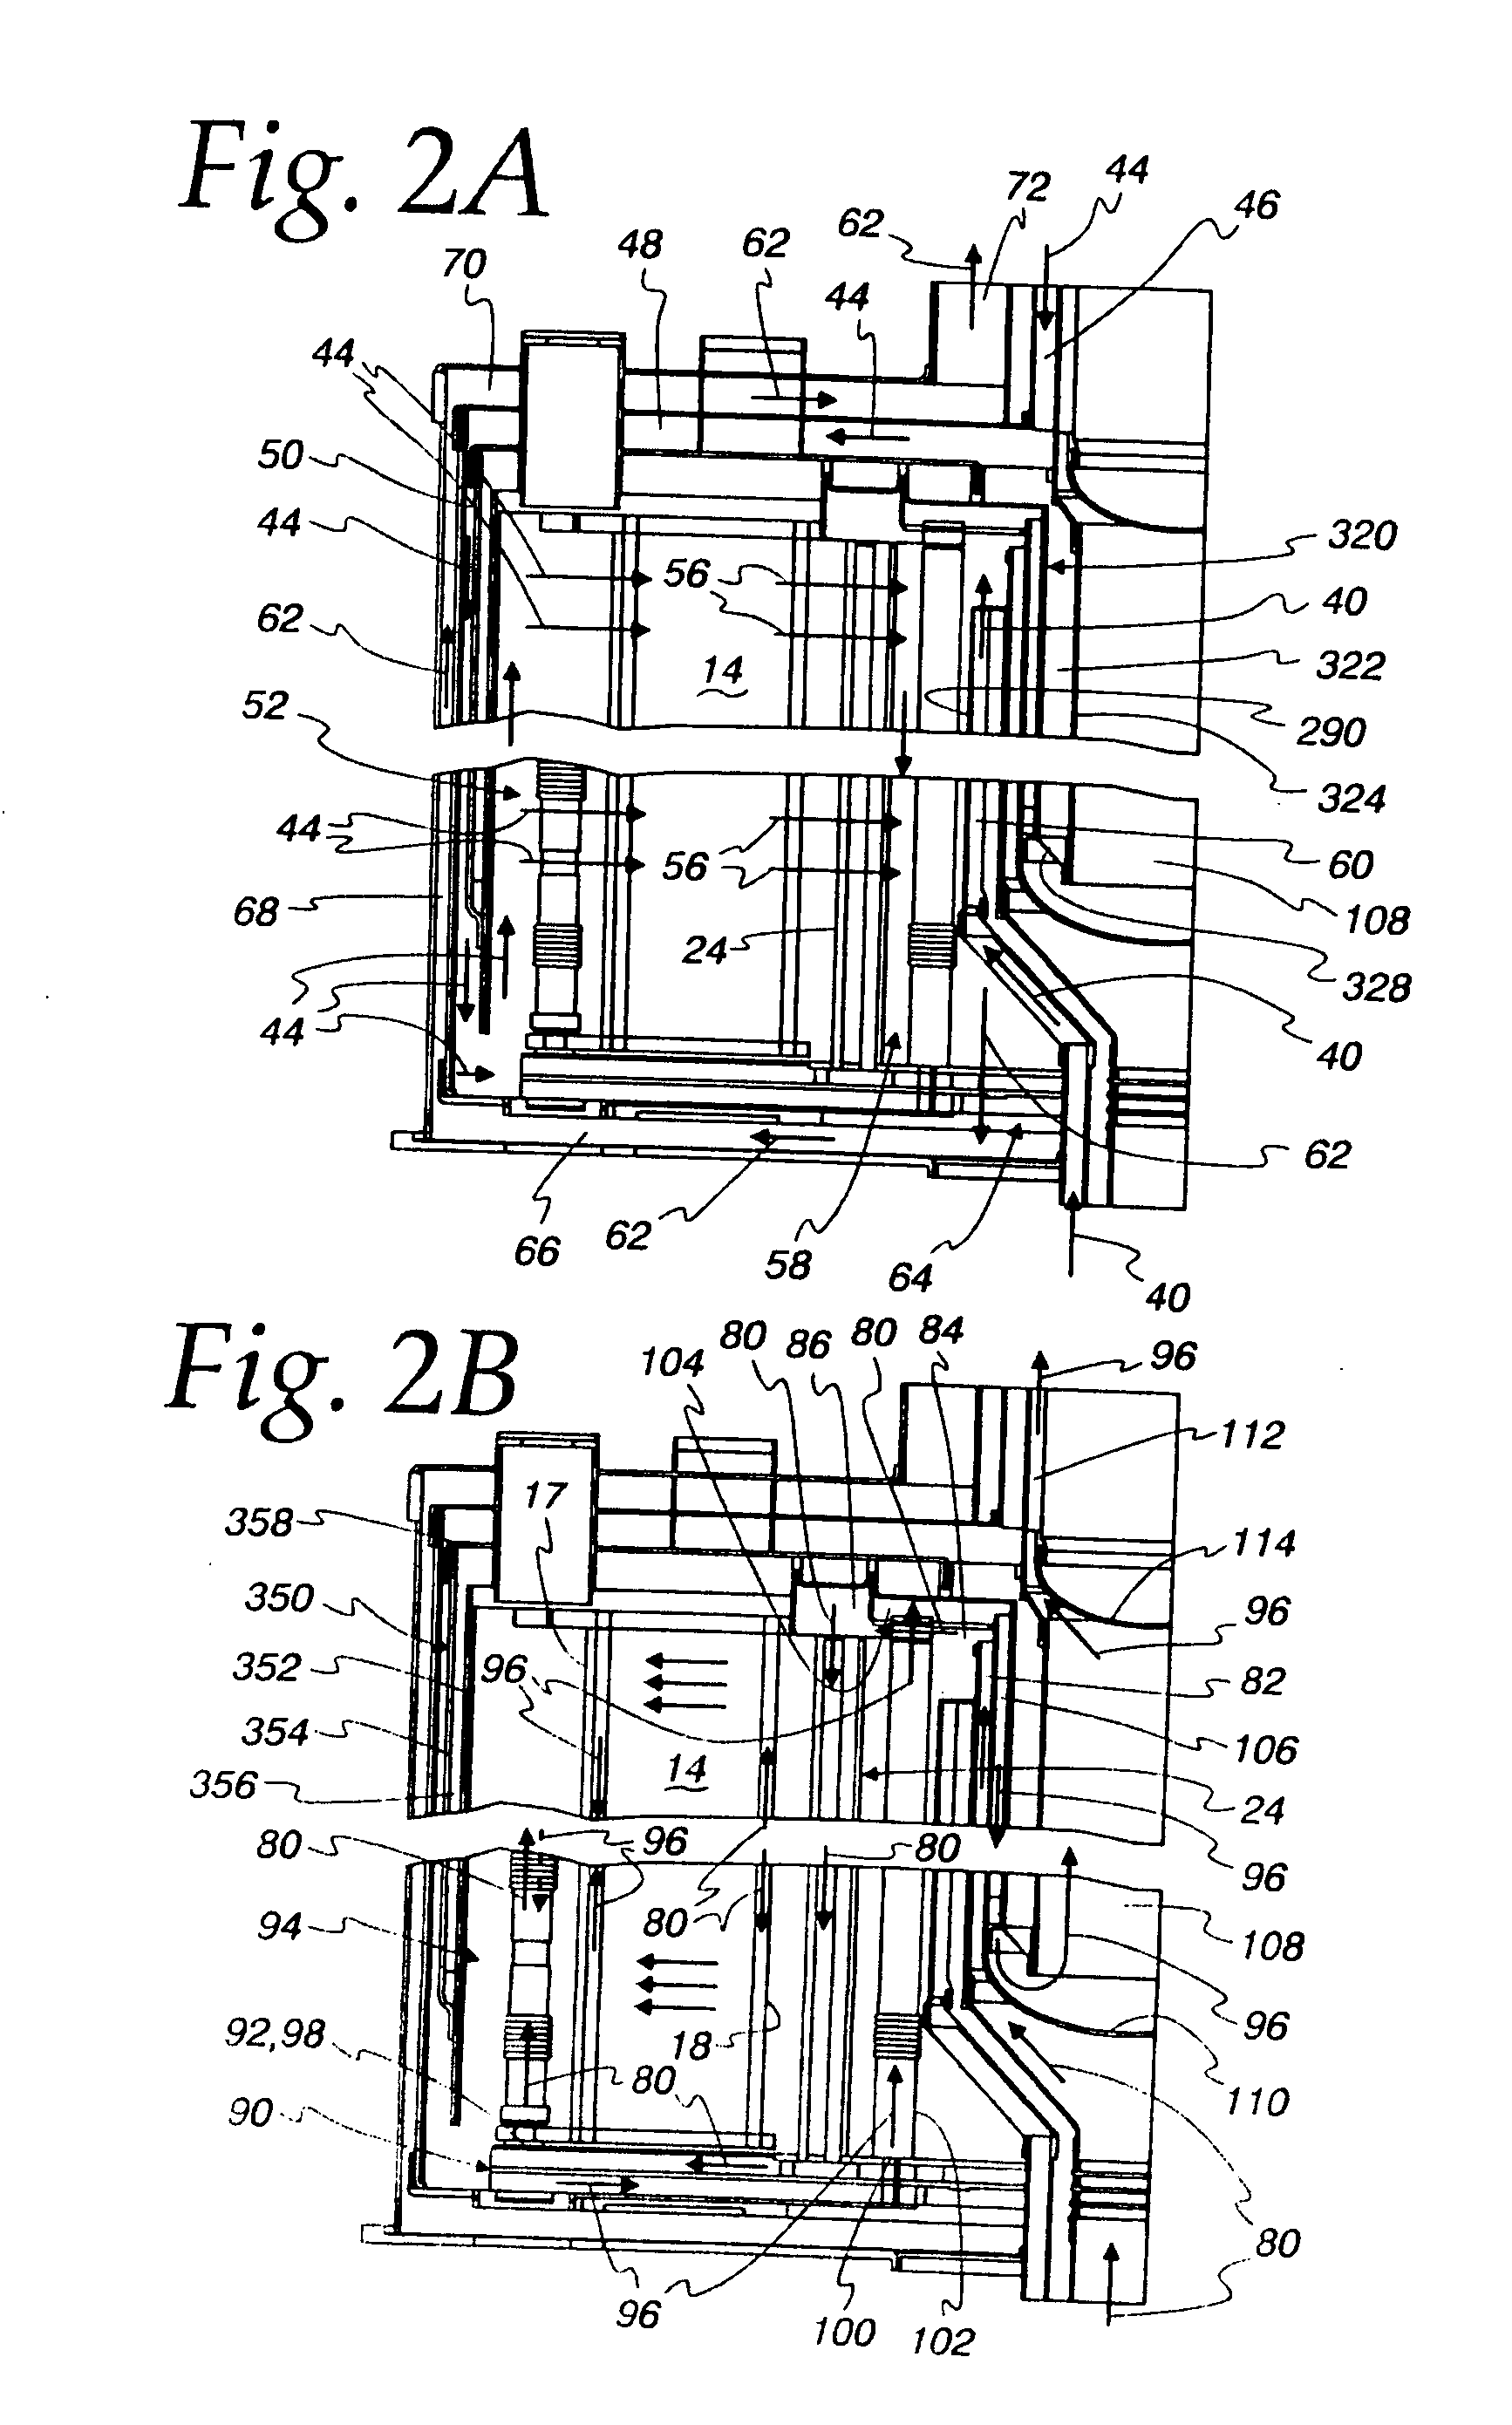 Intergrated solid oxide fuel cell and fuel processor